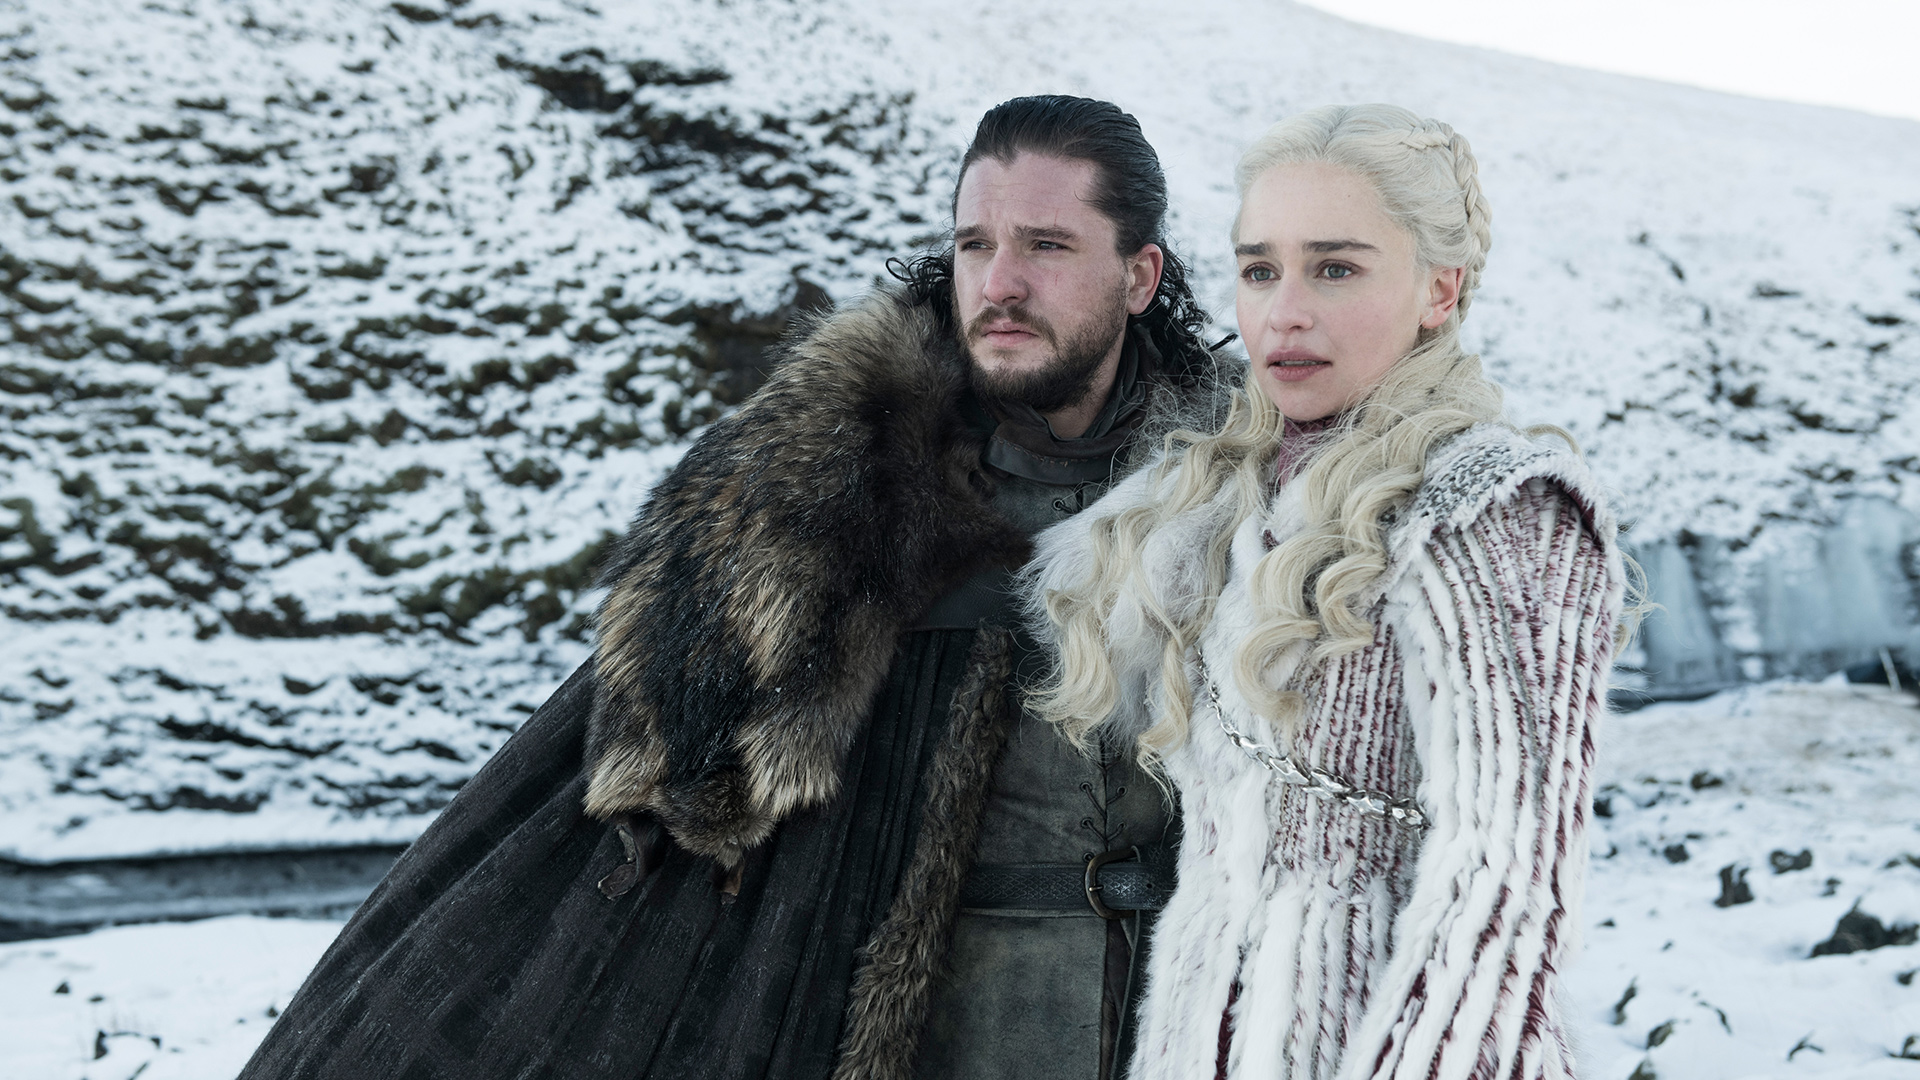 Game of Thrones: HBO releases new images from Season 8